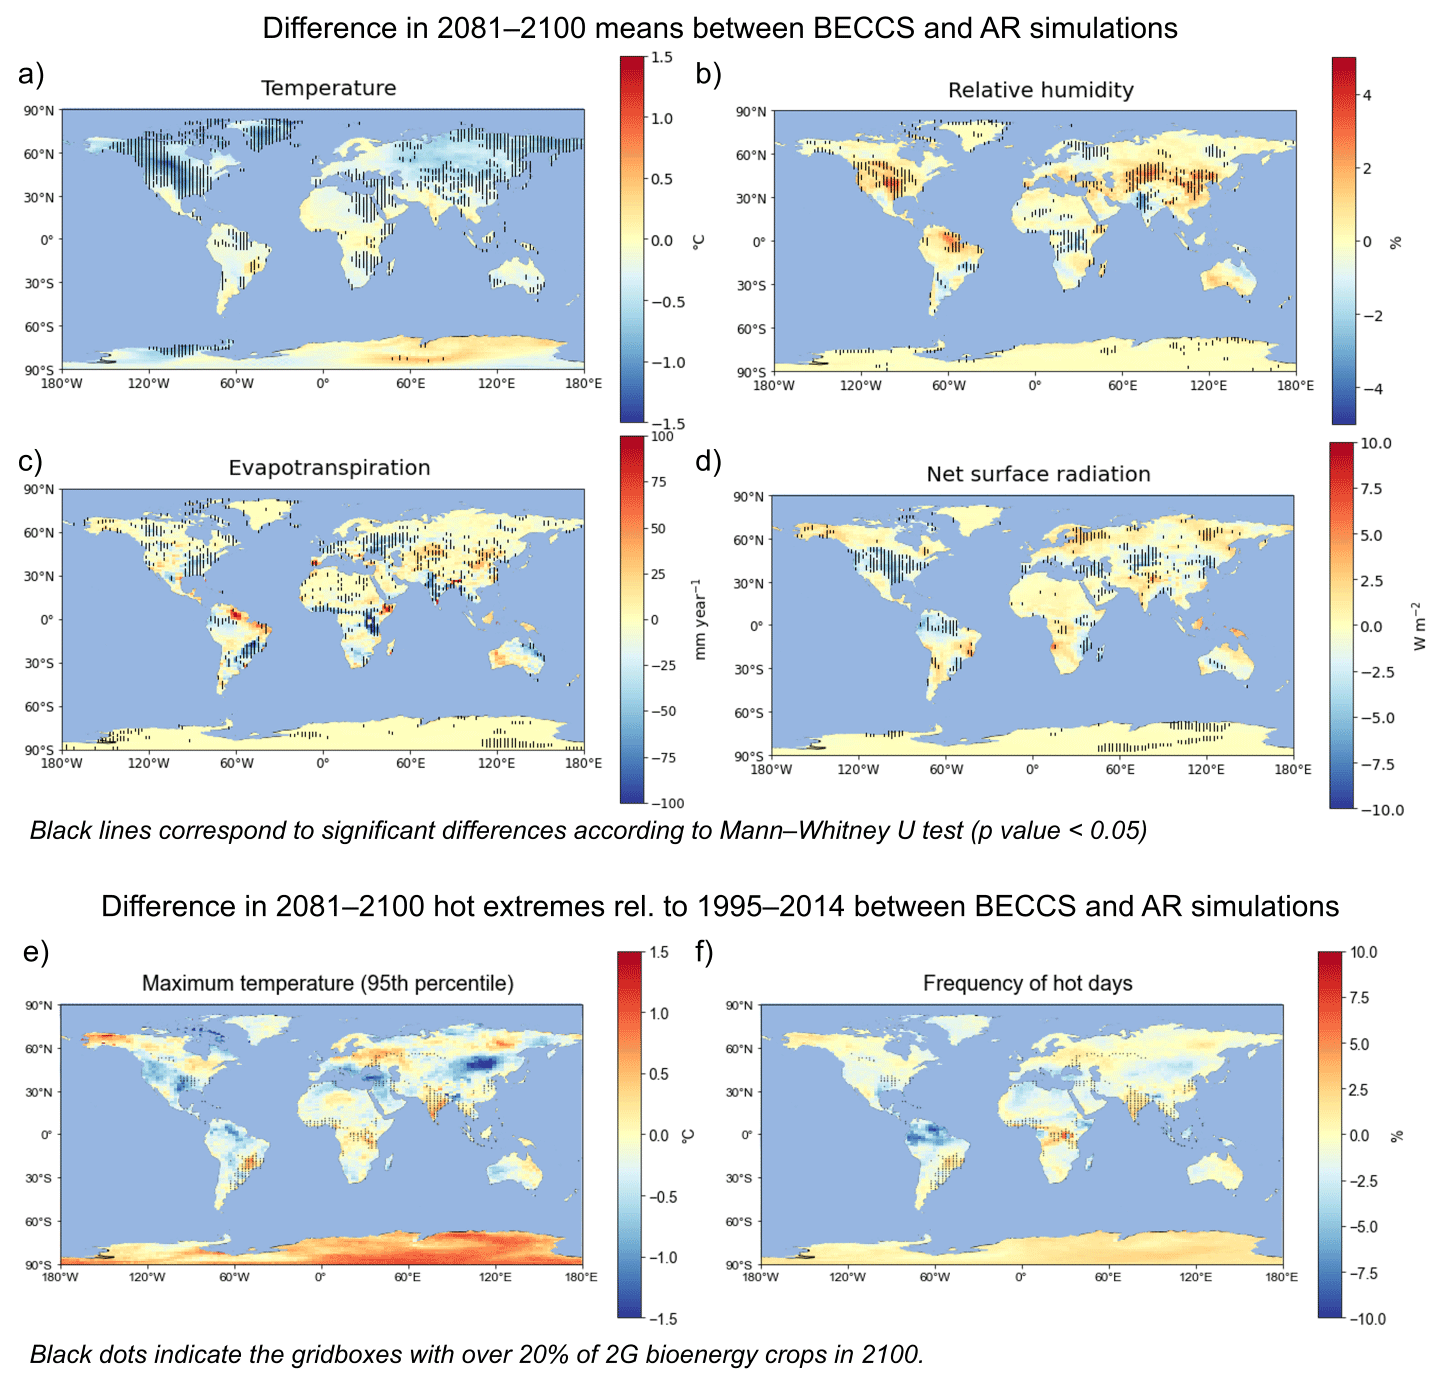 Figure 3. Spatial distributions of climate variables in BECCS and AR experiments. Differences in (a) surface air temperature (°C), (b) relative humidity (%), (c) surface evapotranspiration (mm year-1), and (d) net surface radiation (W m-2) averaged over 2081–2100 between the BECCS and AR experiments. Black vertical lines correspond to the grids with a significant difference (p-value <0.05) according to the Mann-Whitney U test. Differences in (e) daily maximum surface air temperature at 95th percentile (°C) and (f) frequencies of days with maximum temperature above 95th percentile (%) estimated in 2081–2100 rel. to 95th percentile of 1995–2014 baseline in BECCS and AR experiments. Black dots indicate the grids with over 20% of second-generation bioenergy crops in 2100. Positive values indicate larger values in the BECCS than in the AR experiment.